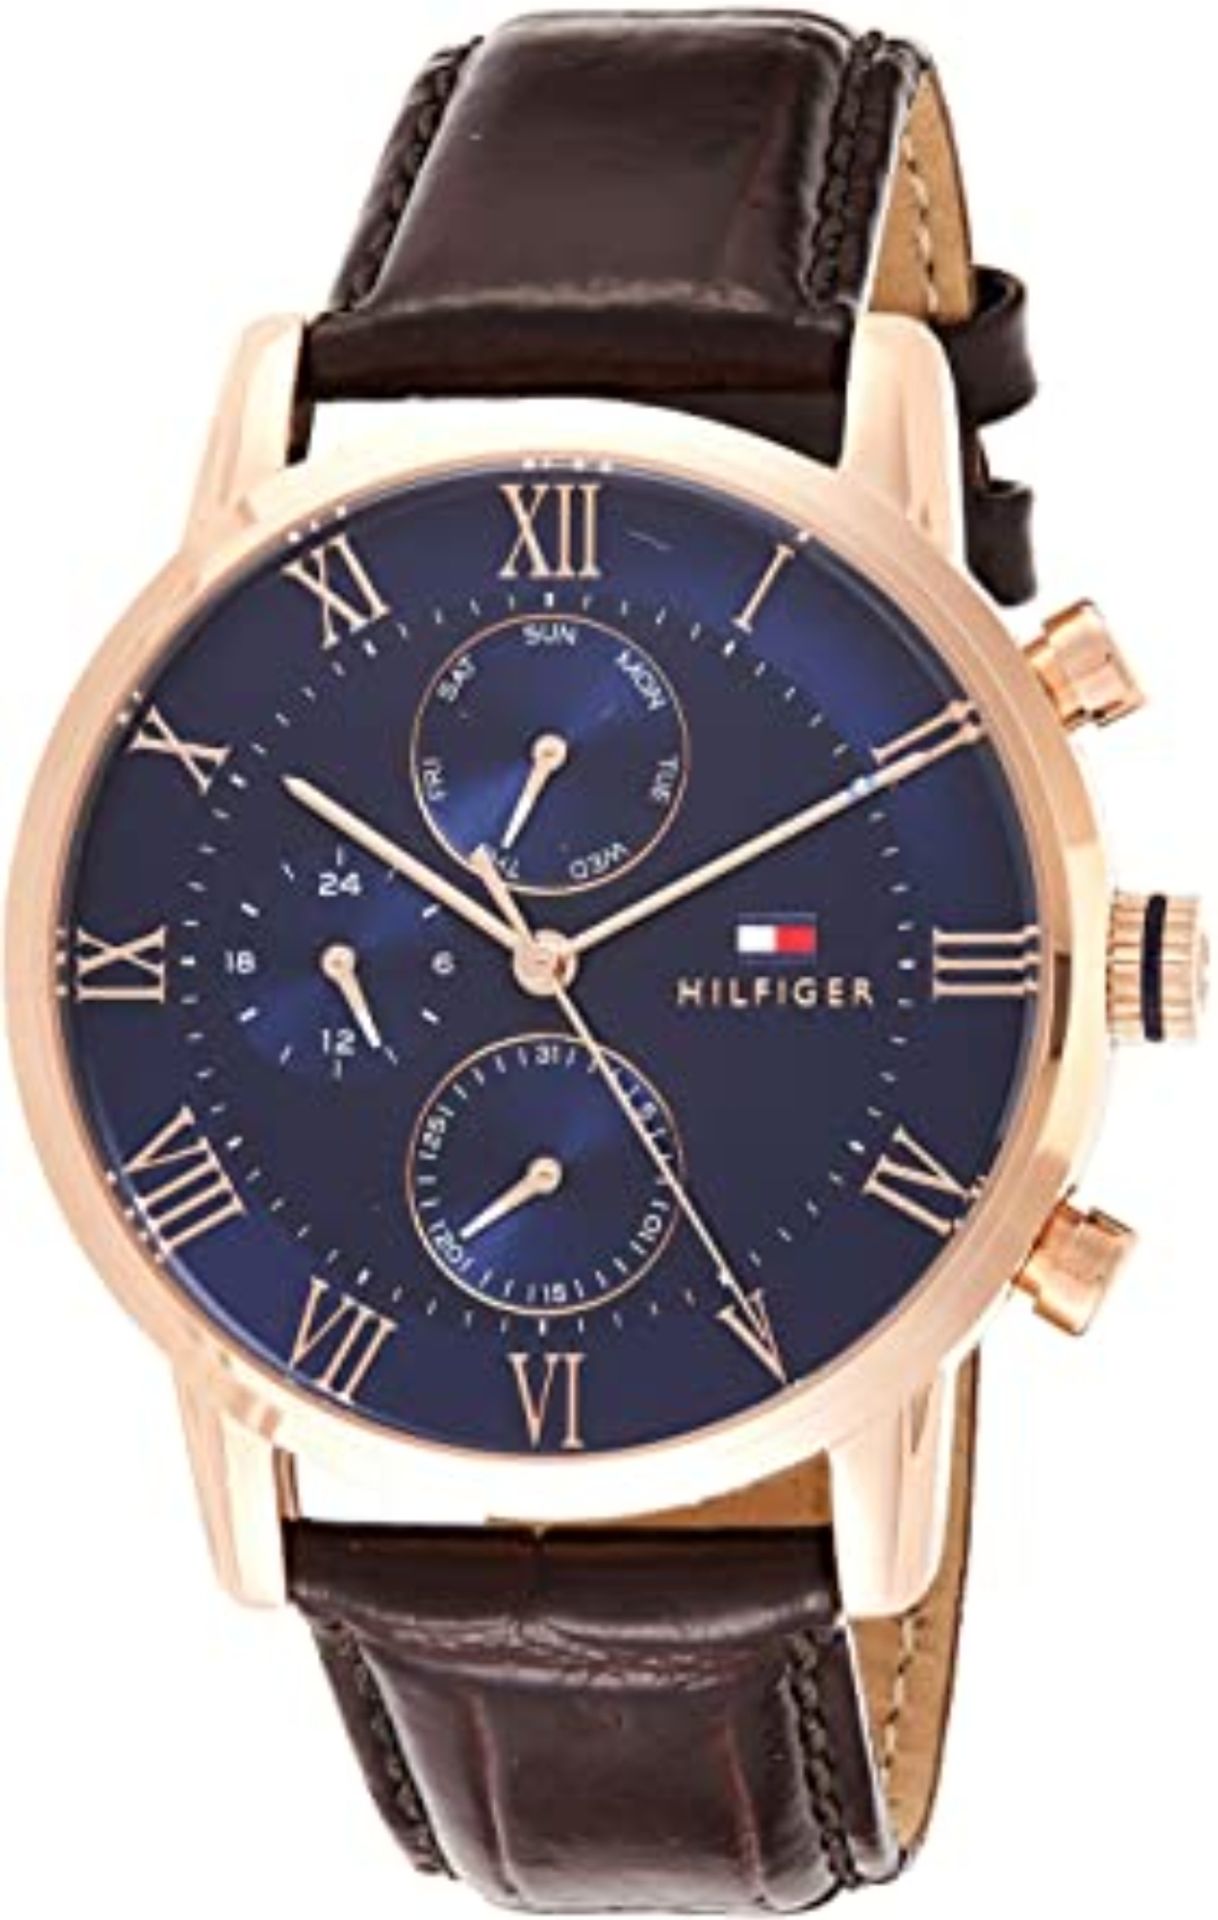 Tommy Hilfiger 1791399 Kane Rose Gold Tone Chronograph Men's Watch - Image 2 of 6